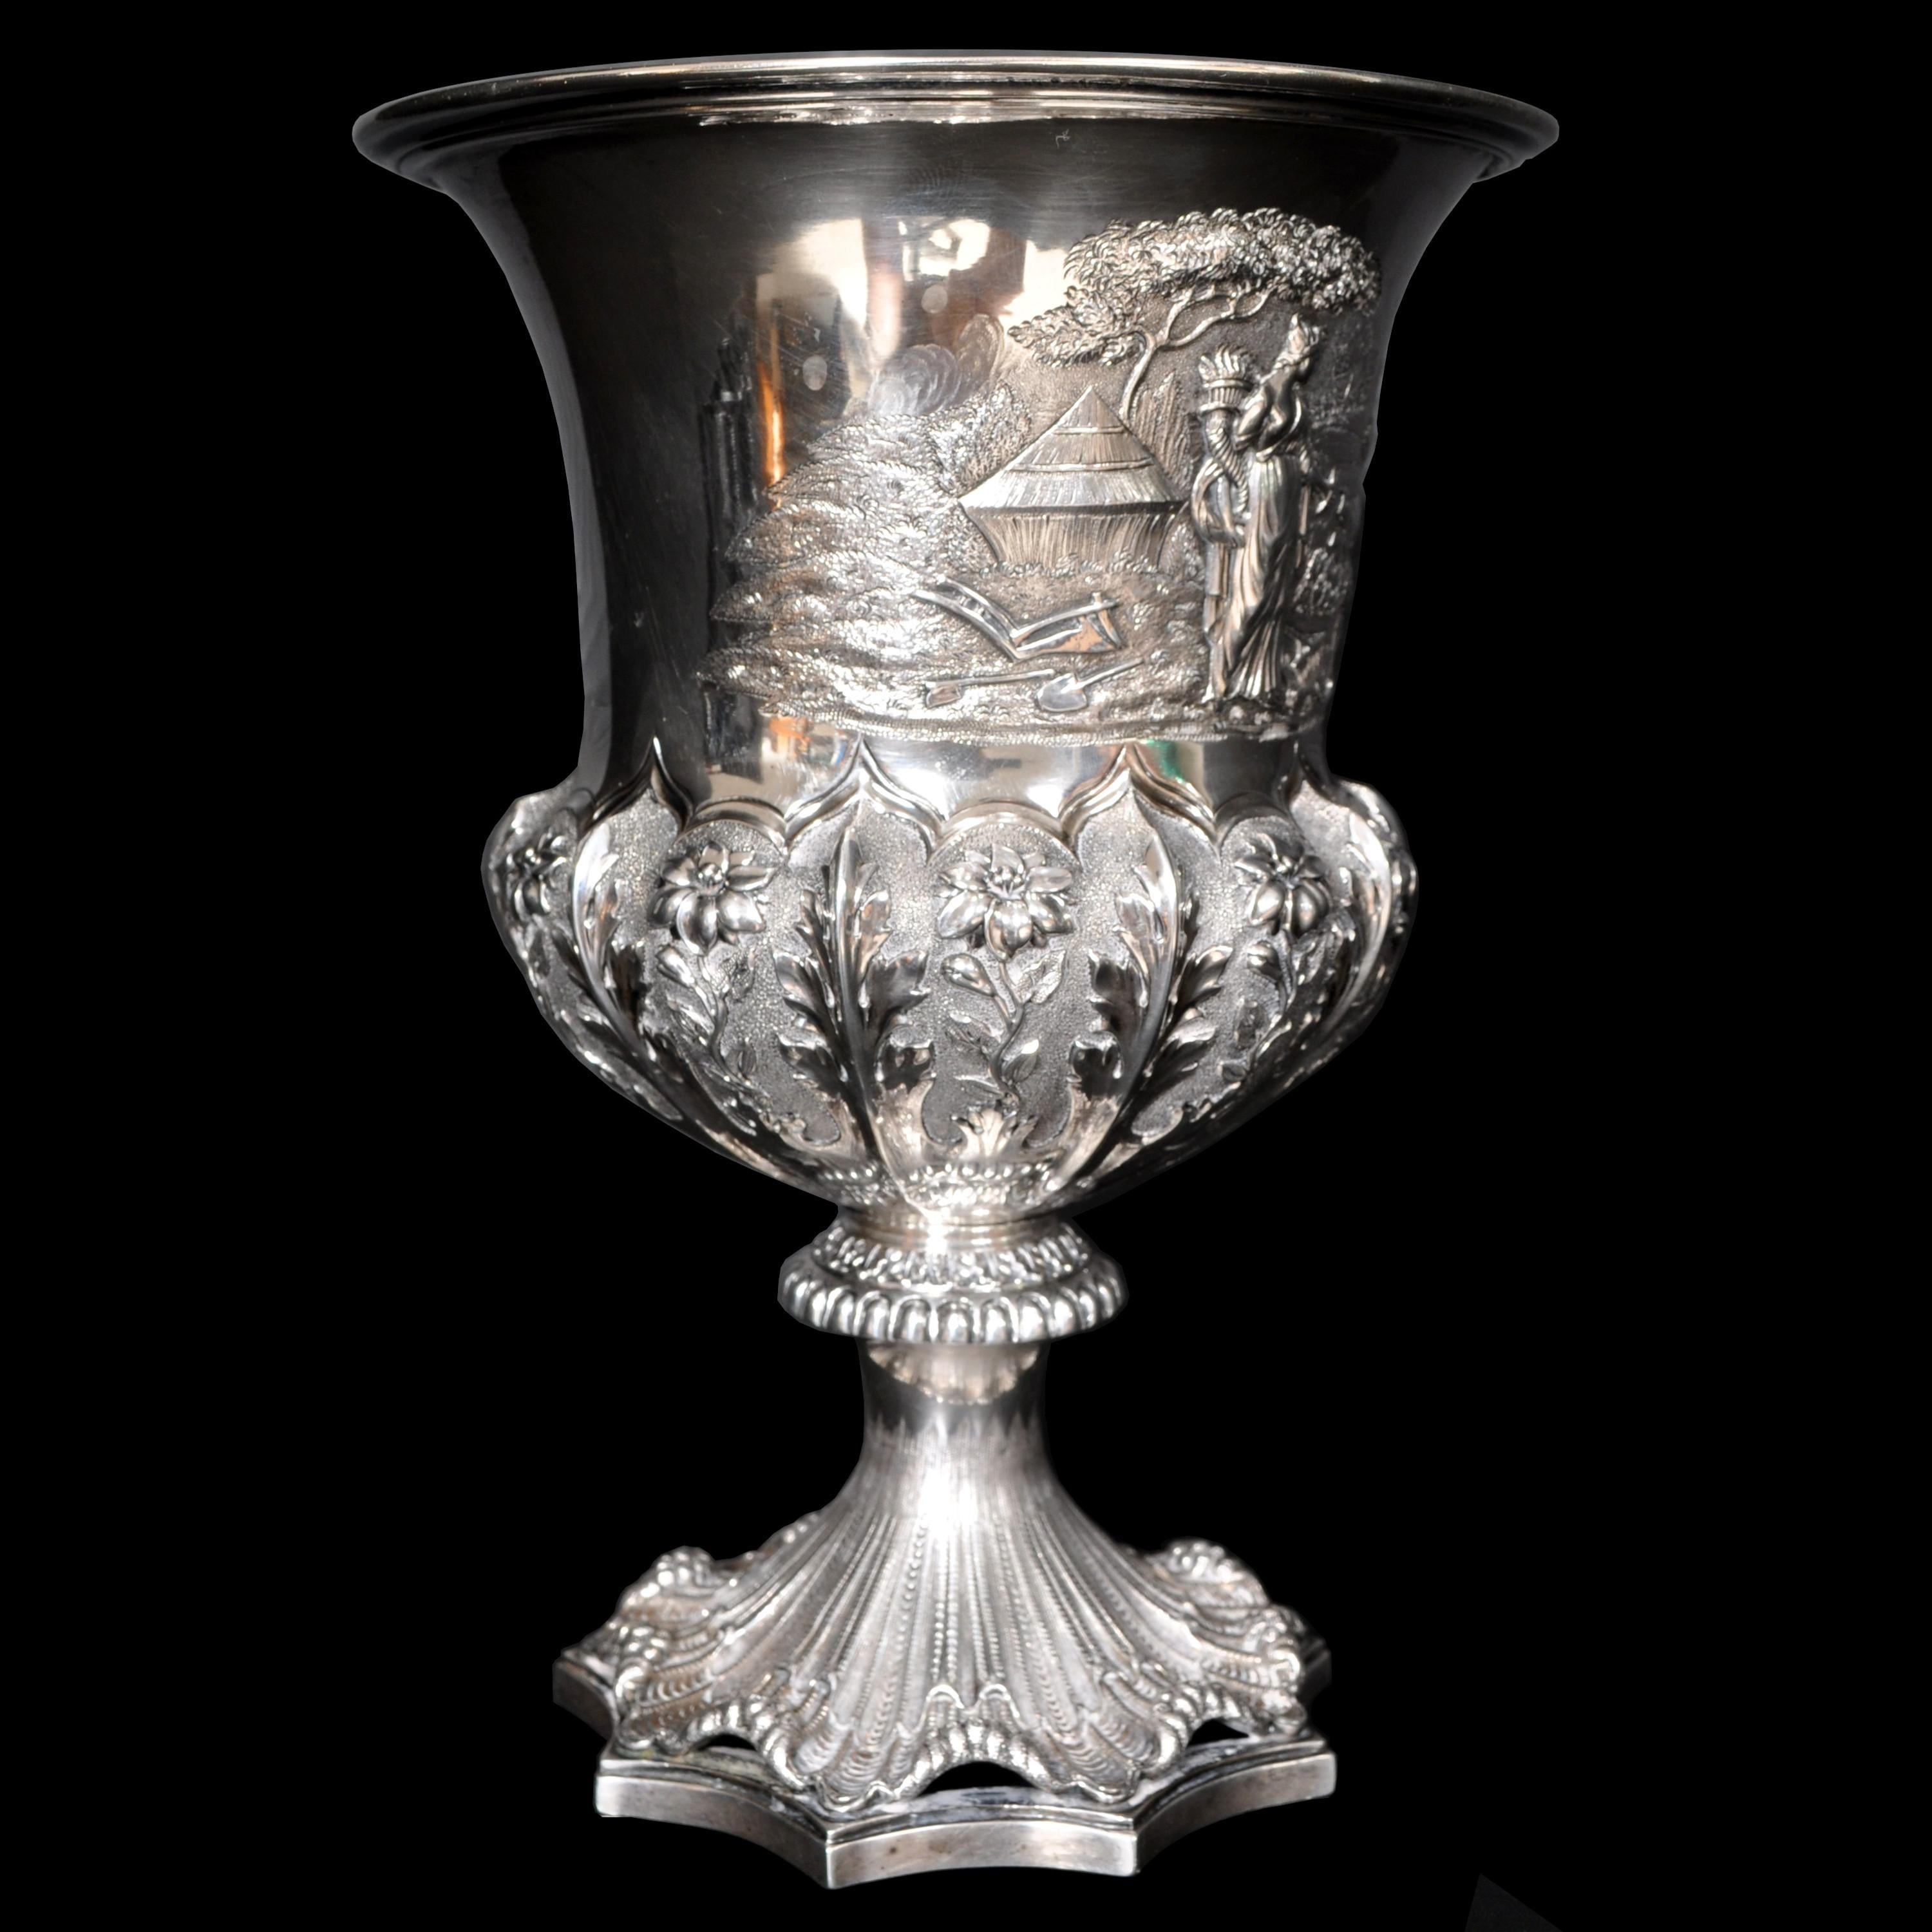 Mid-19th Century Fine & Rare Antique Sterling Silver William IV London Presentation Cup, 1831 For Sale